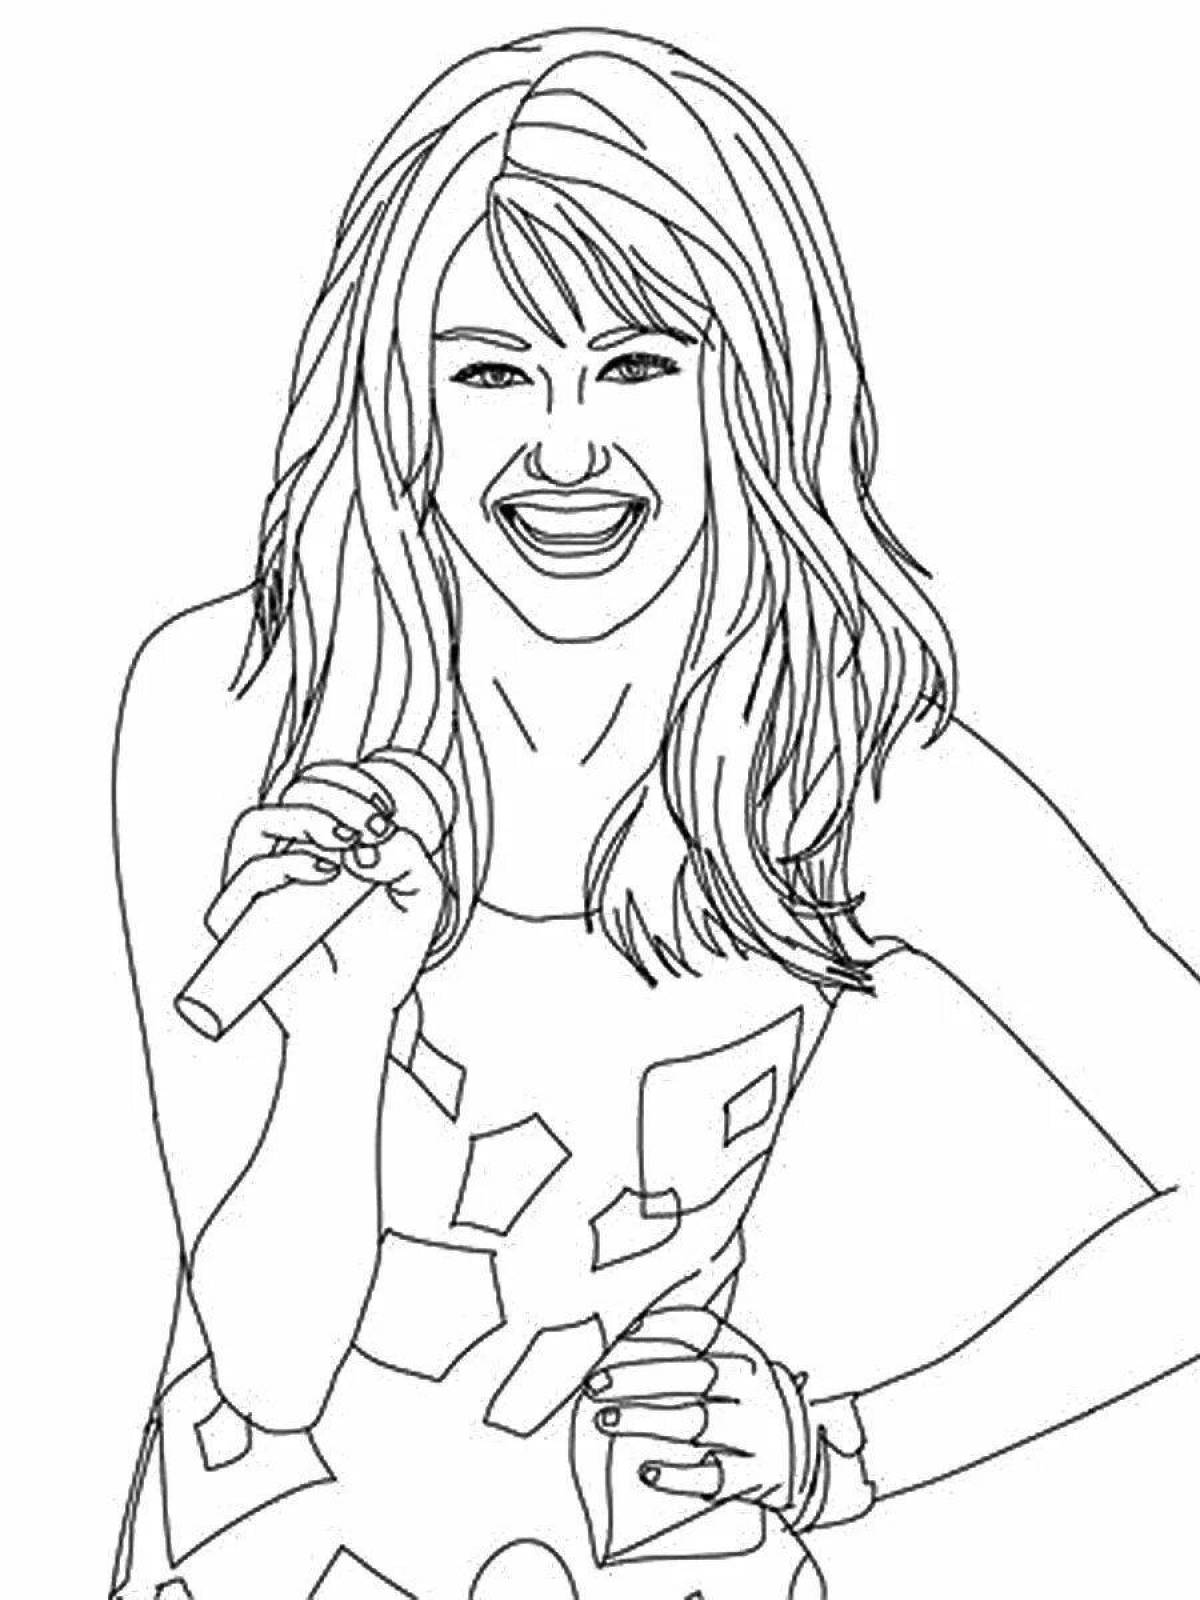 Adorable celebrity coloring pages